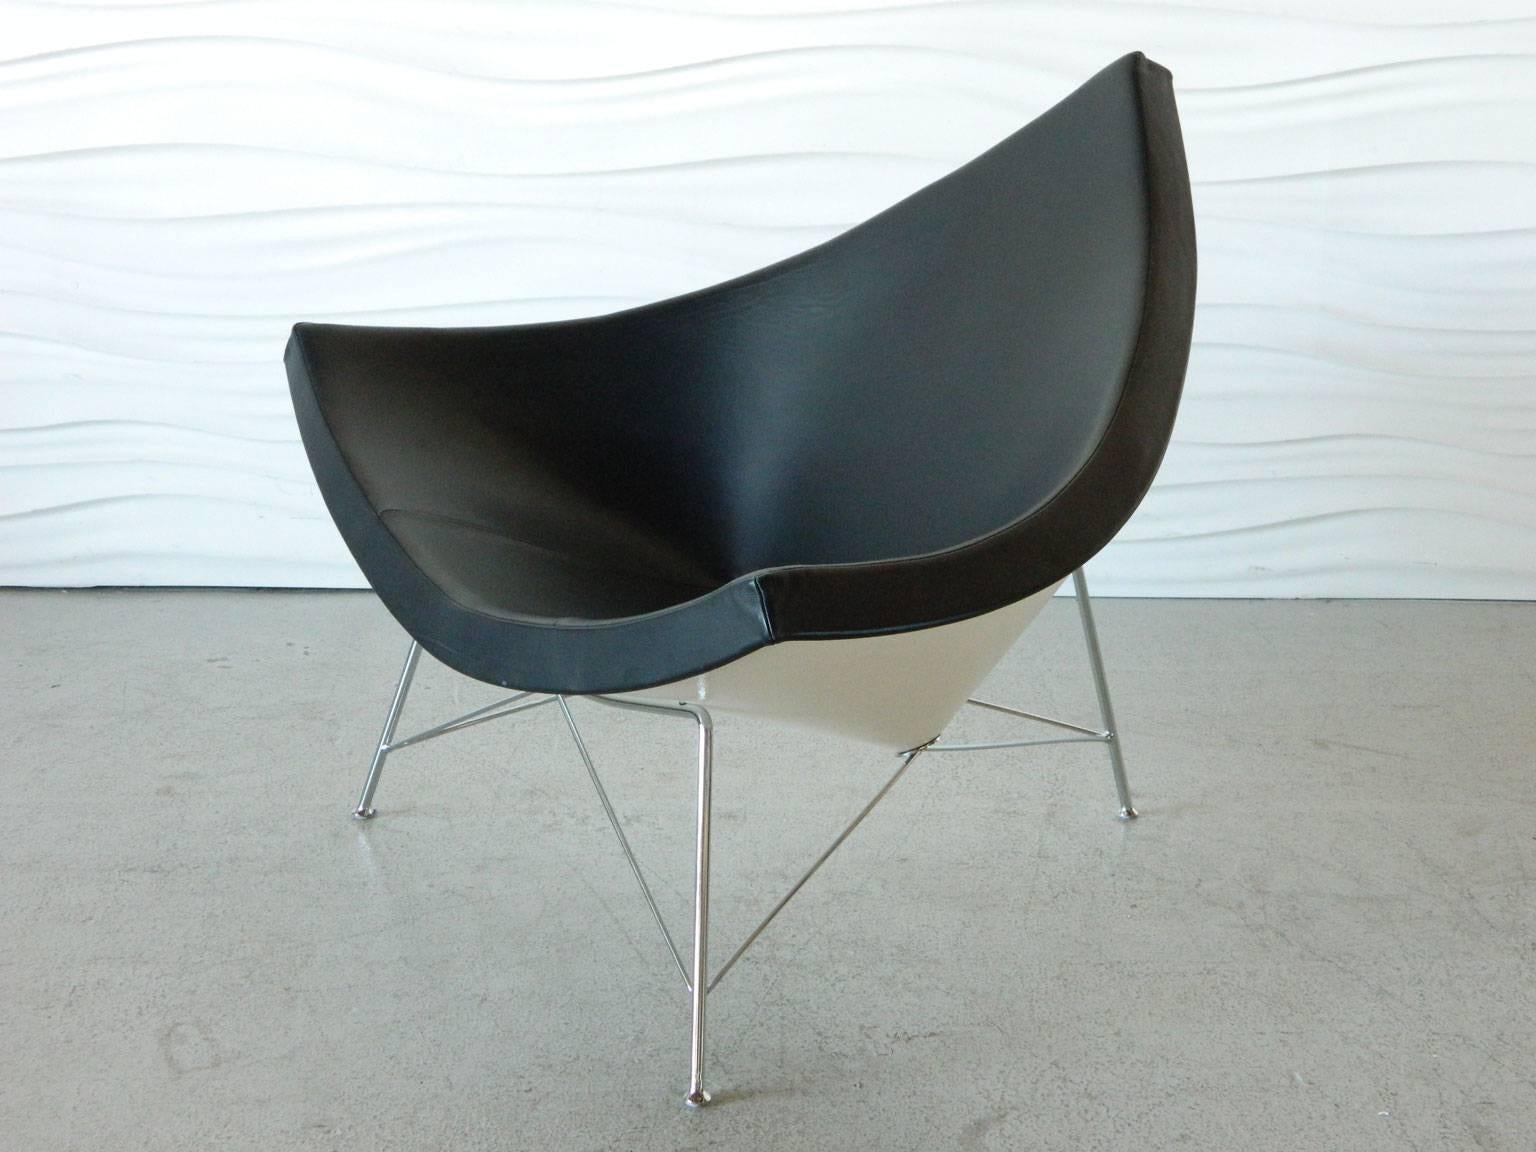 This 2007 re-edition of George Nelson's iconic Coconut chair was manufactured by Vitra Furniture.